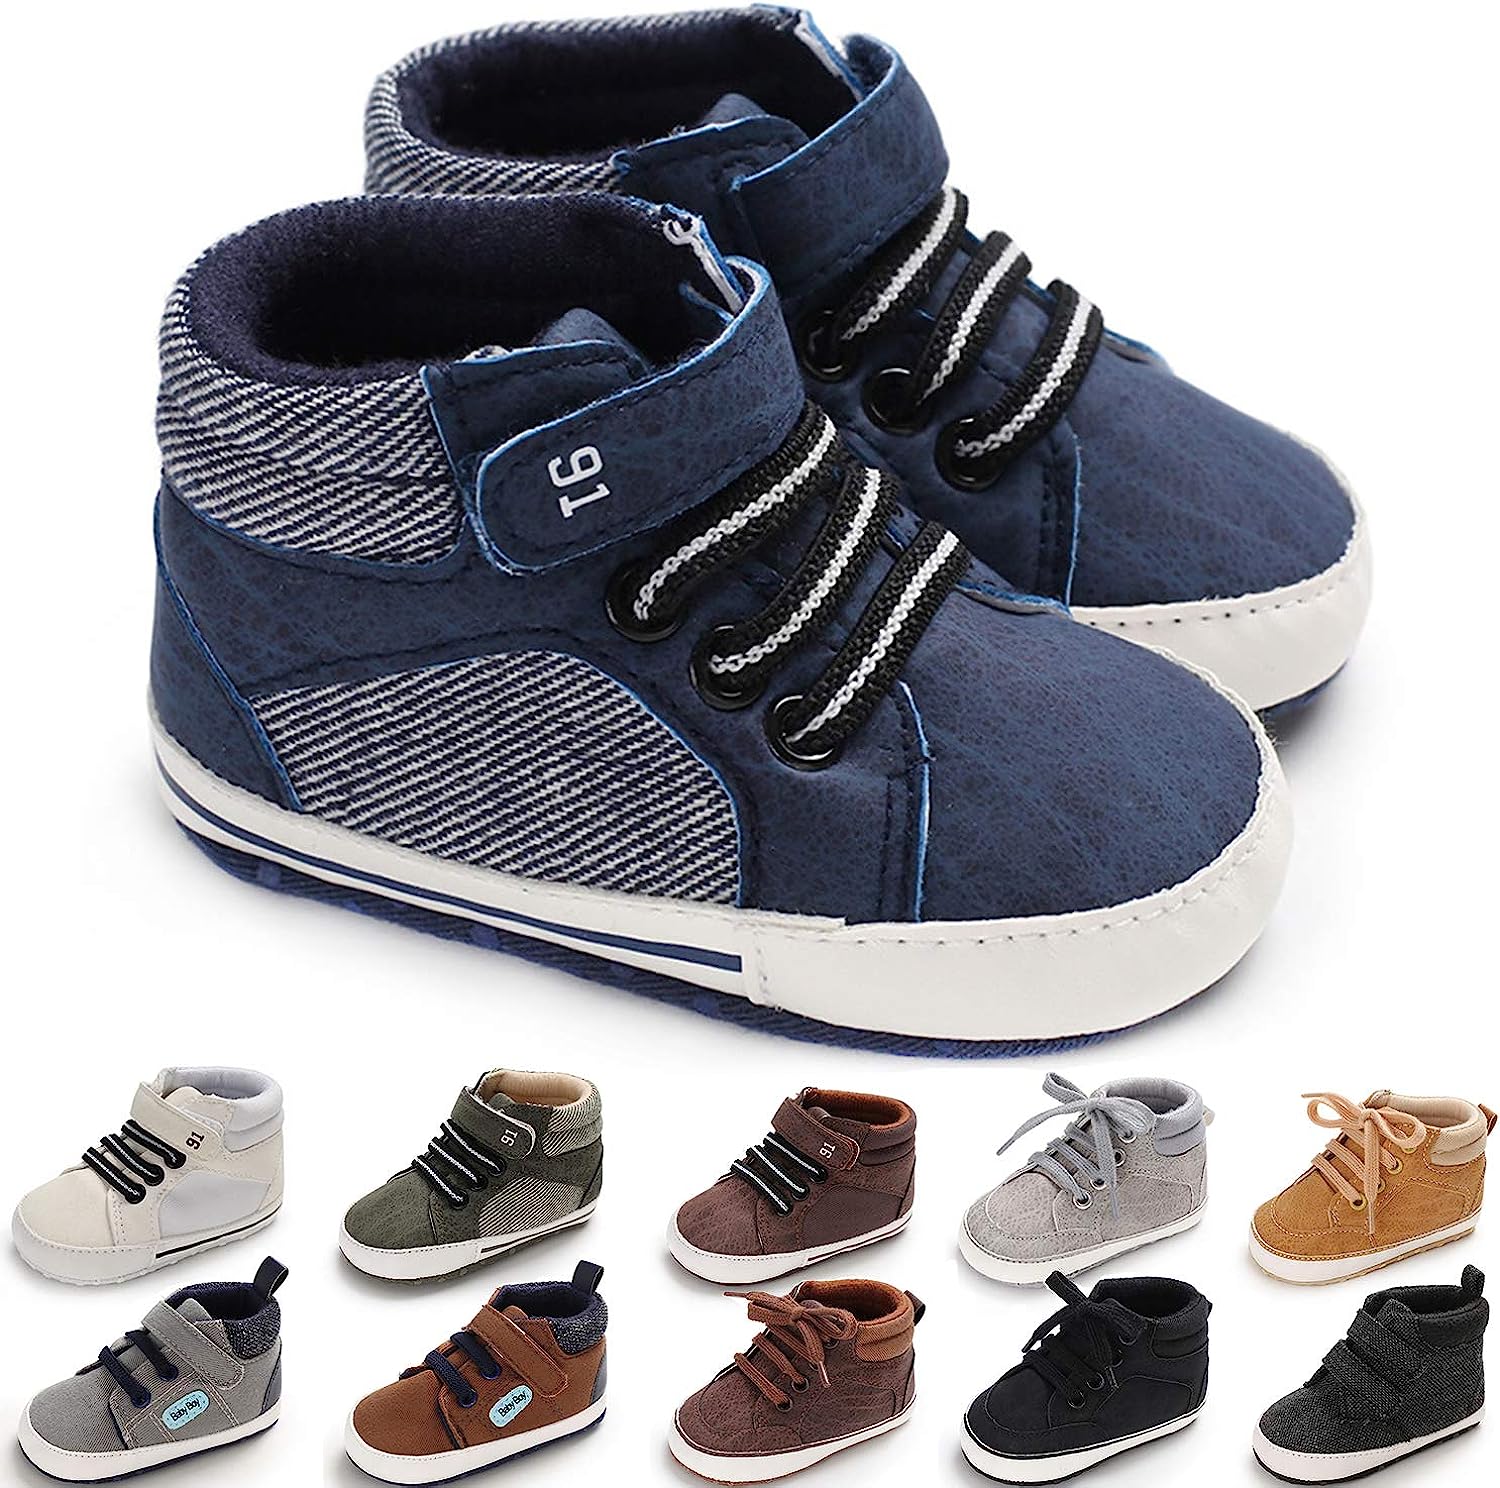 CENCIRILY Baby Boys Girls High Top Sneakers Soft Soles [...]